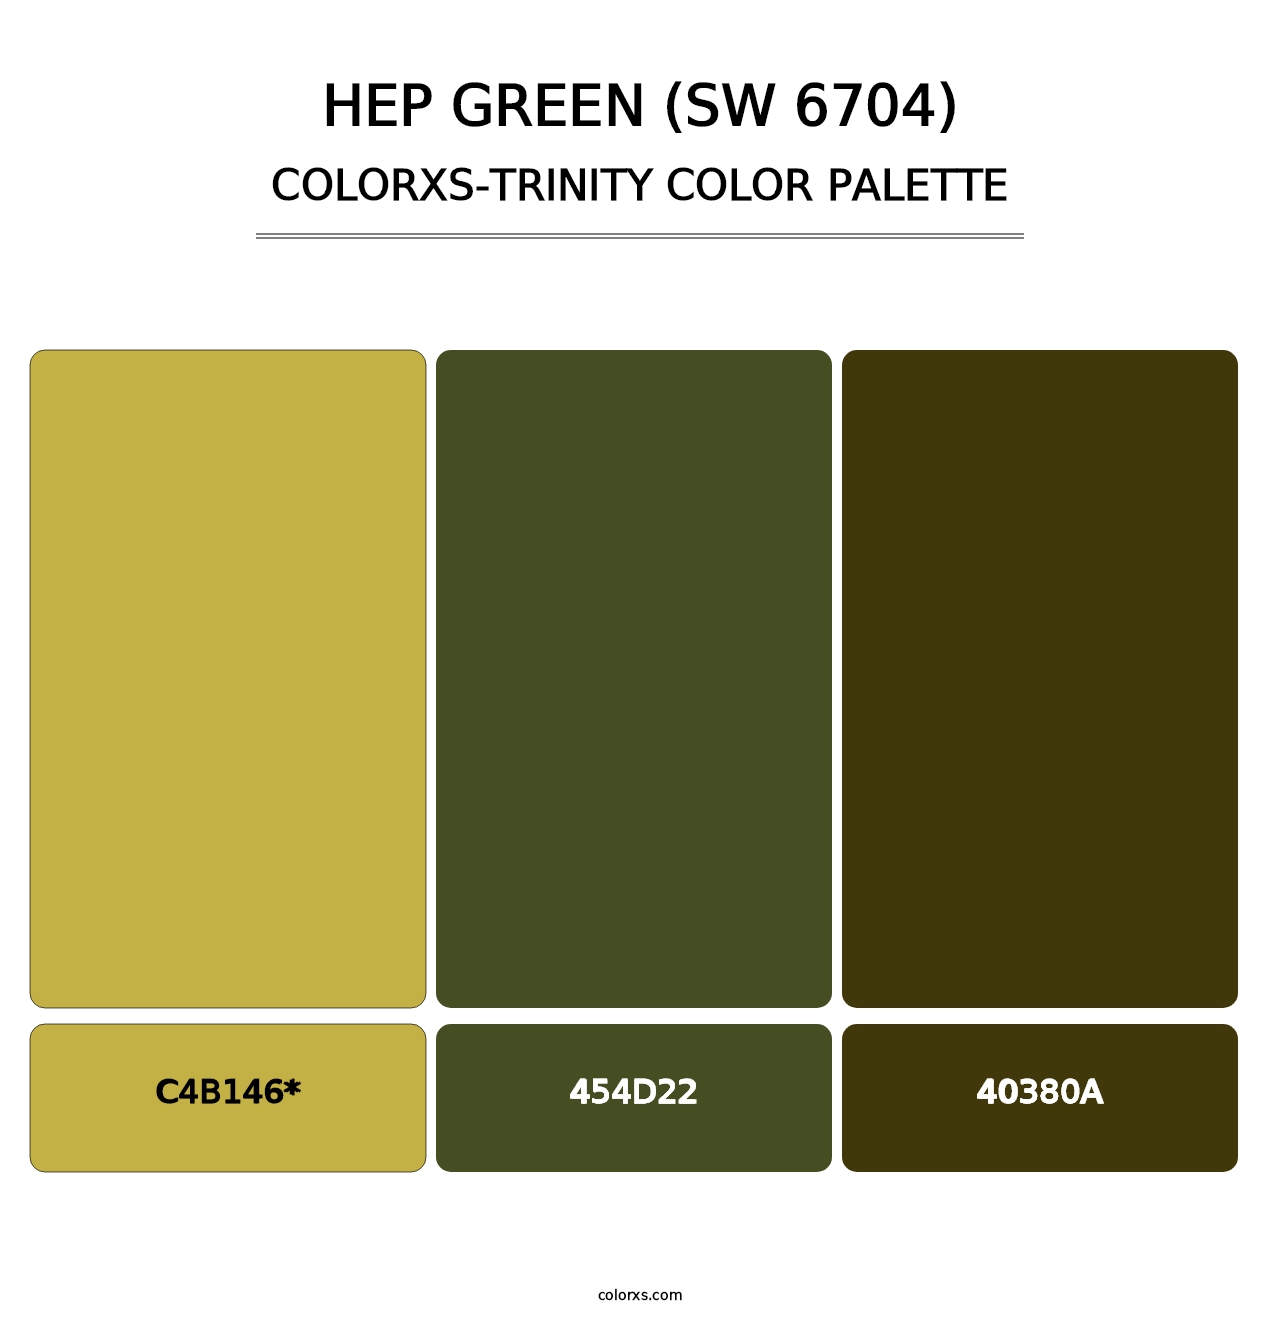 Hep Green (SW 6704) - Colorxs Trinity Palette